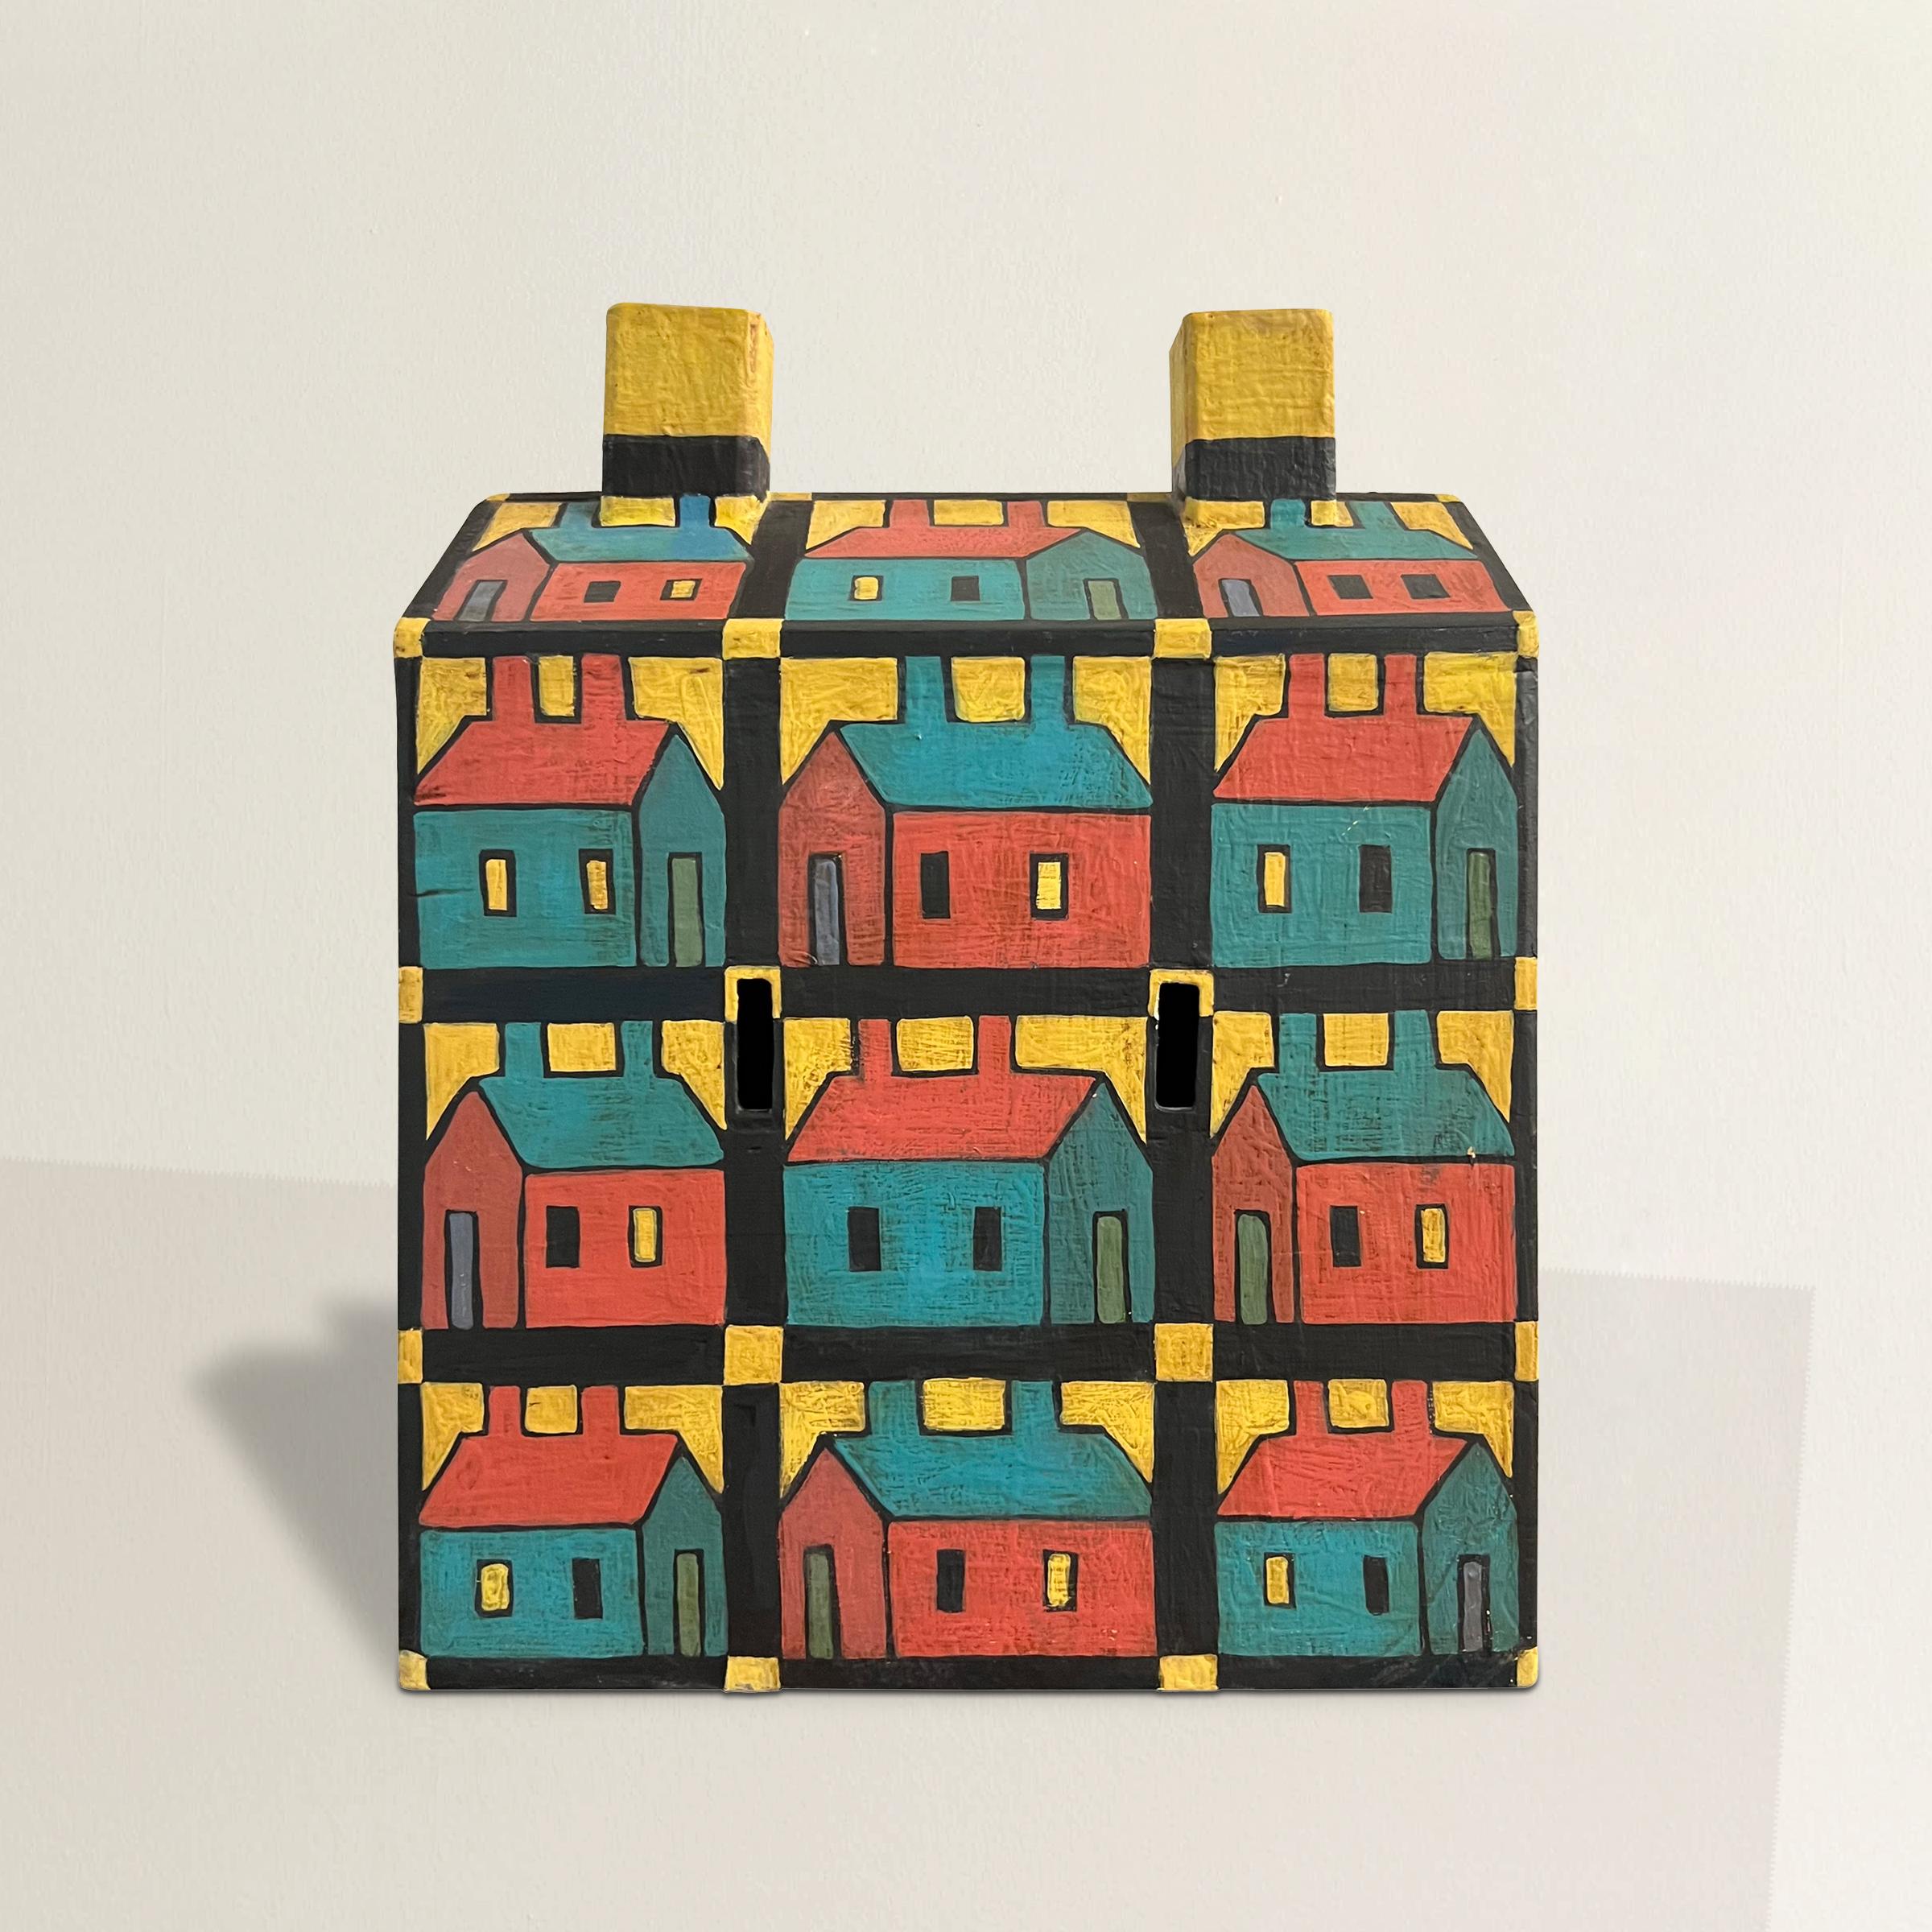 Embark on a journey through color and creativity with this 20th-century American Folk Art sculpture, a whimsical homage to the Chicago Imagist style, evoking the spirit of visionaries like Roger Brown. The house is a kaleidoscope of hand-painted